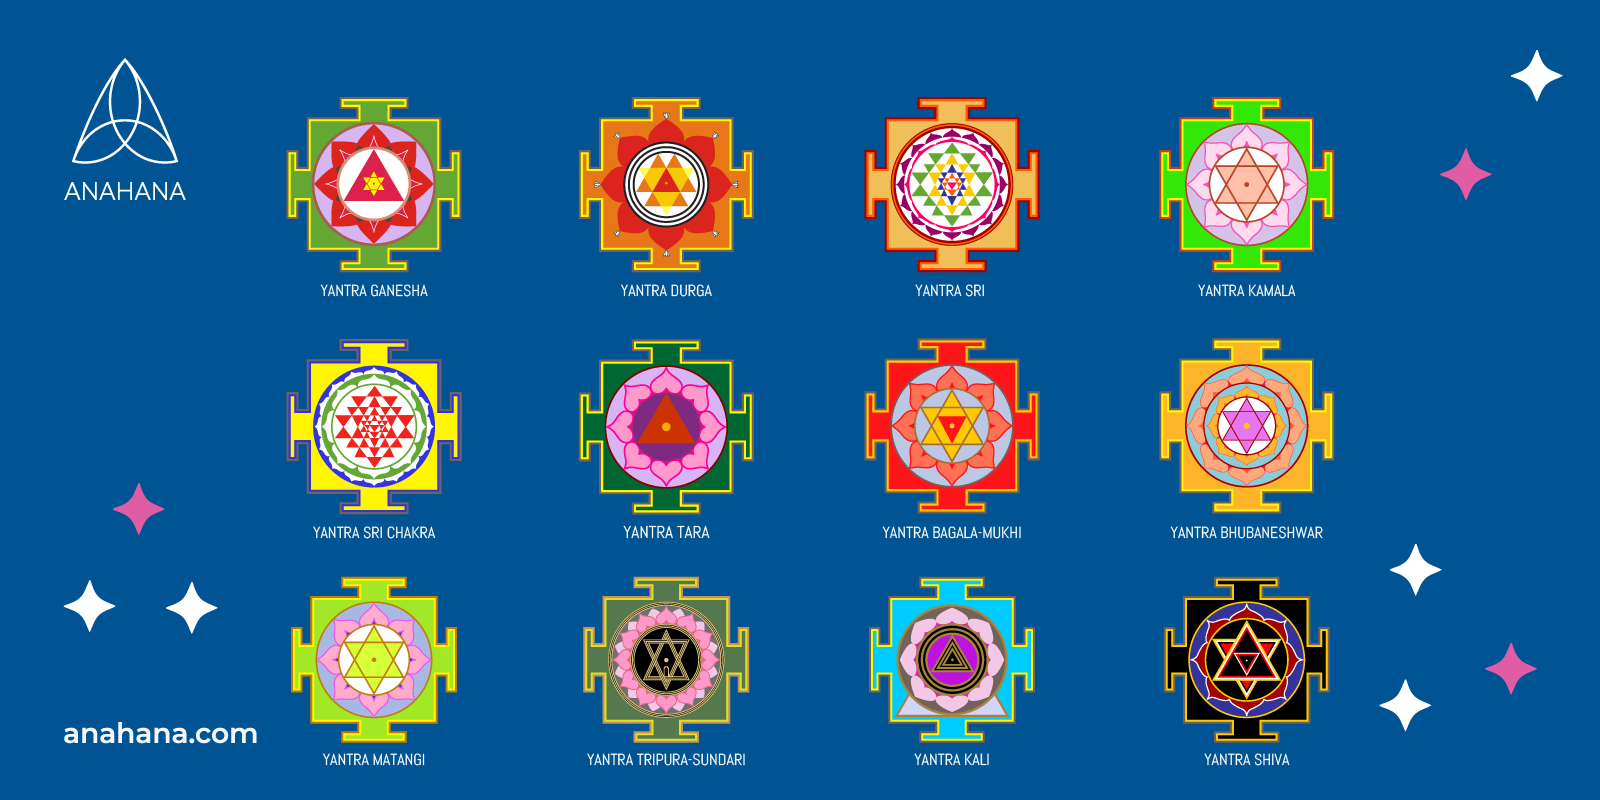 types of yantras available